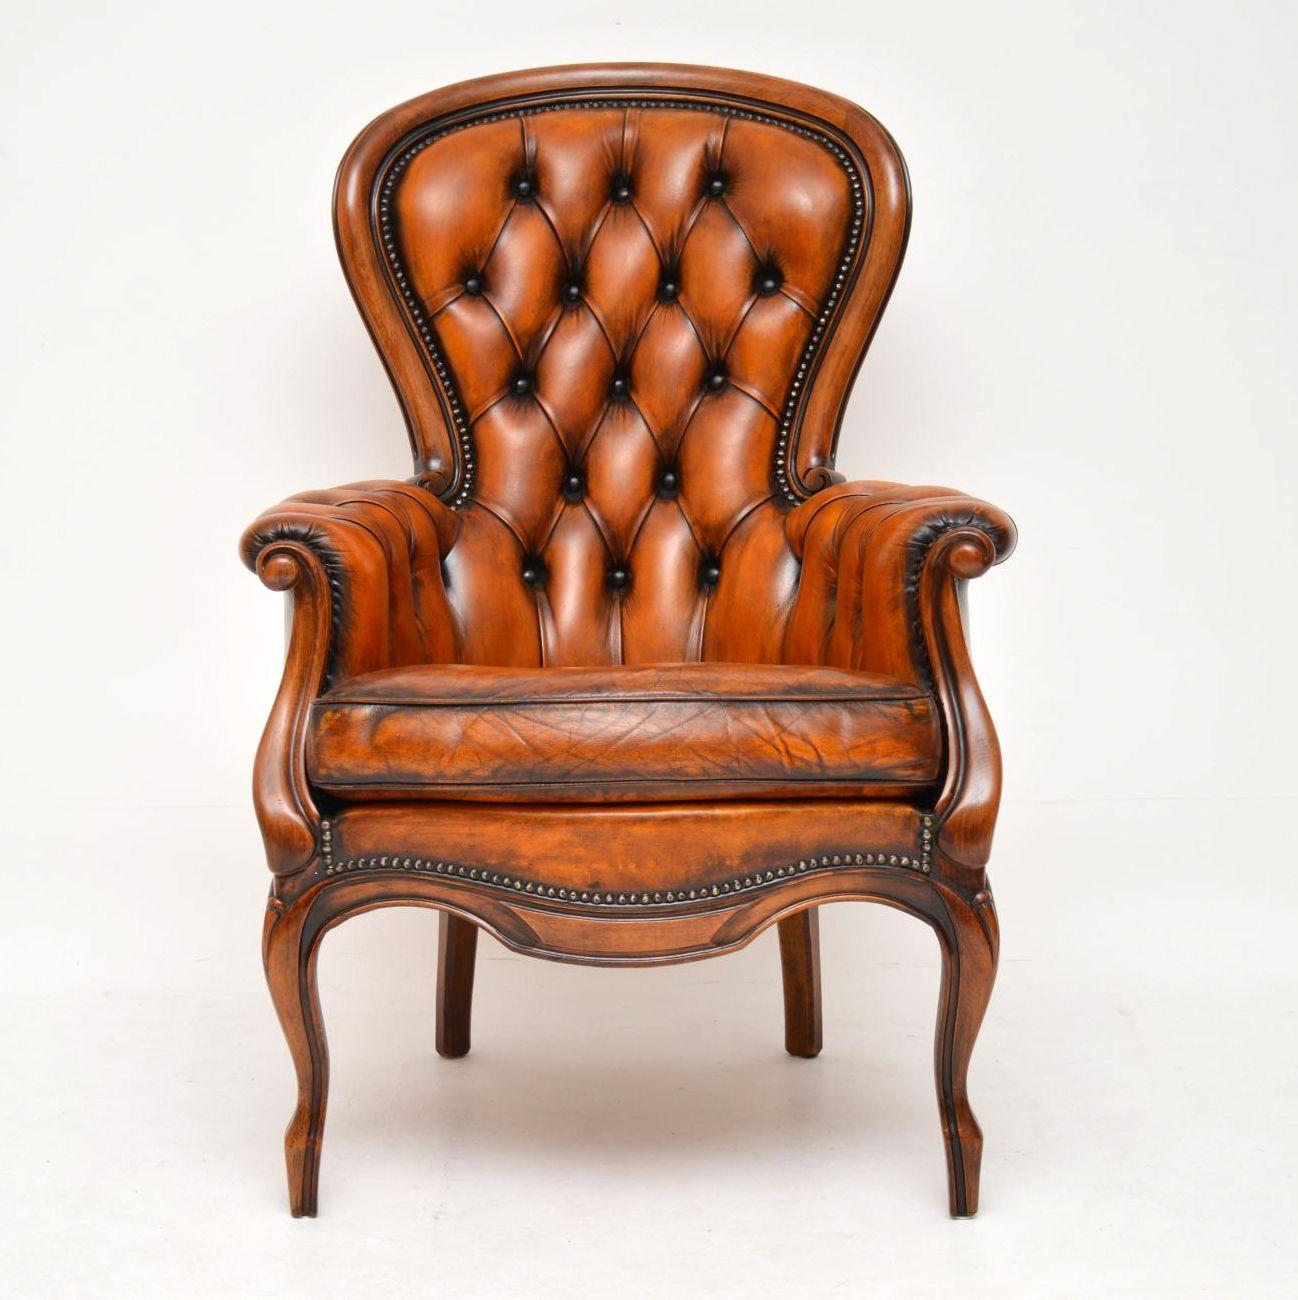 This antique French spoon back armchair still has the original deep buttoned leather upholstery on it. Our leather specialist has revived, polished and enhanced the color, so it still has a lot of character. It’s in excellent condition, dating from